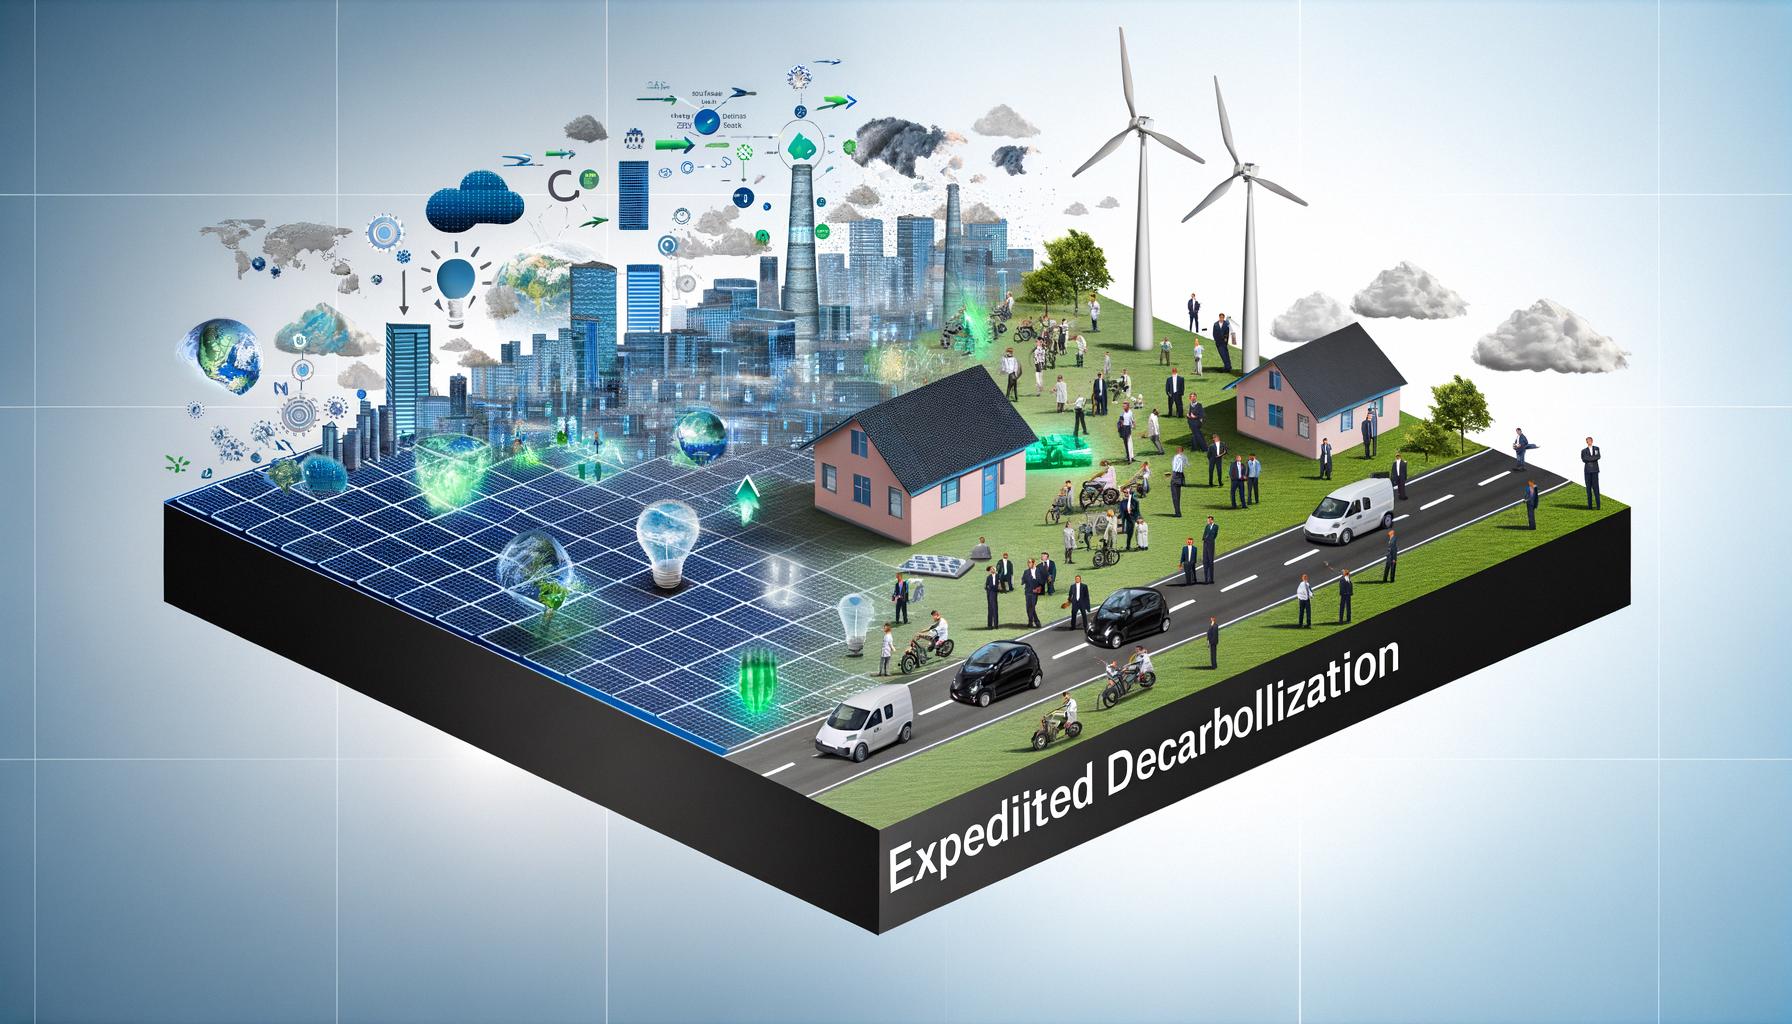 Expedited decarbonization across technology sectors Balanced News